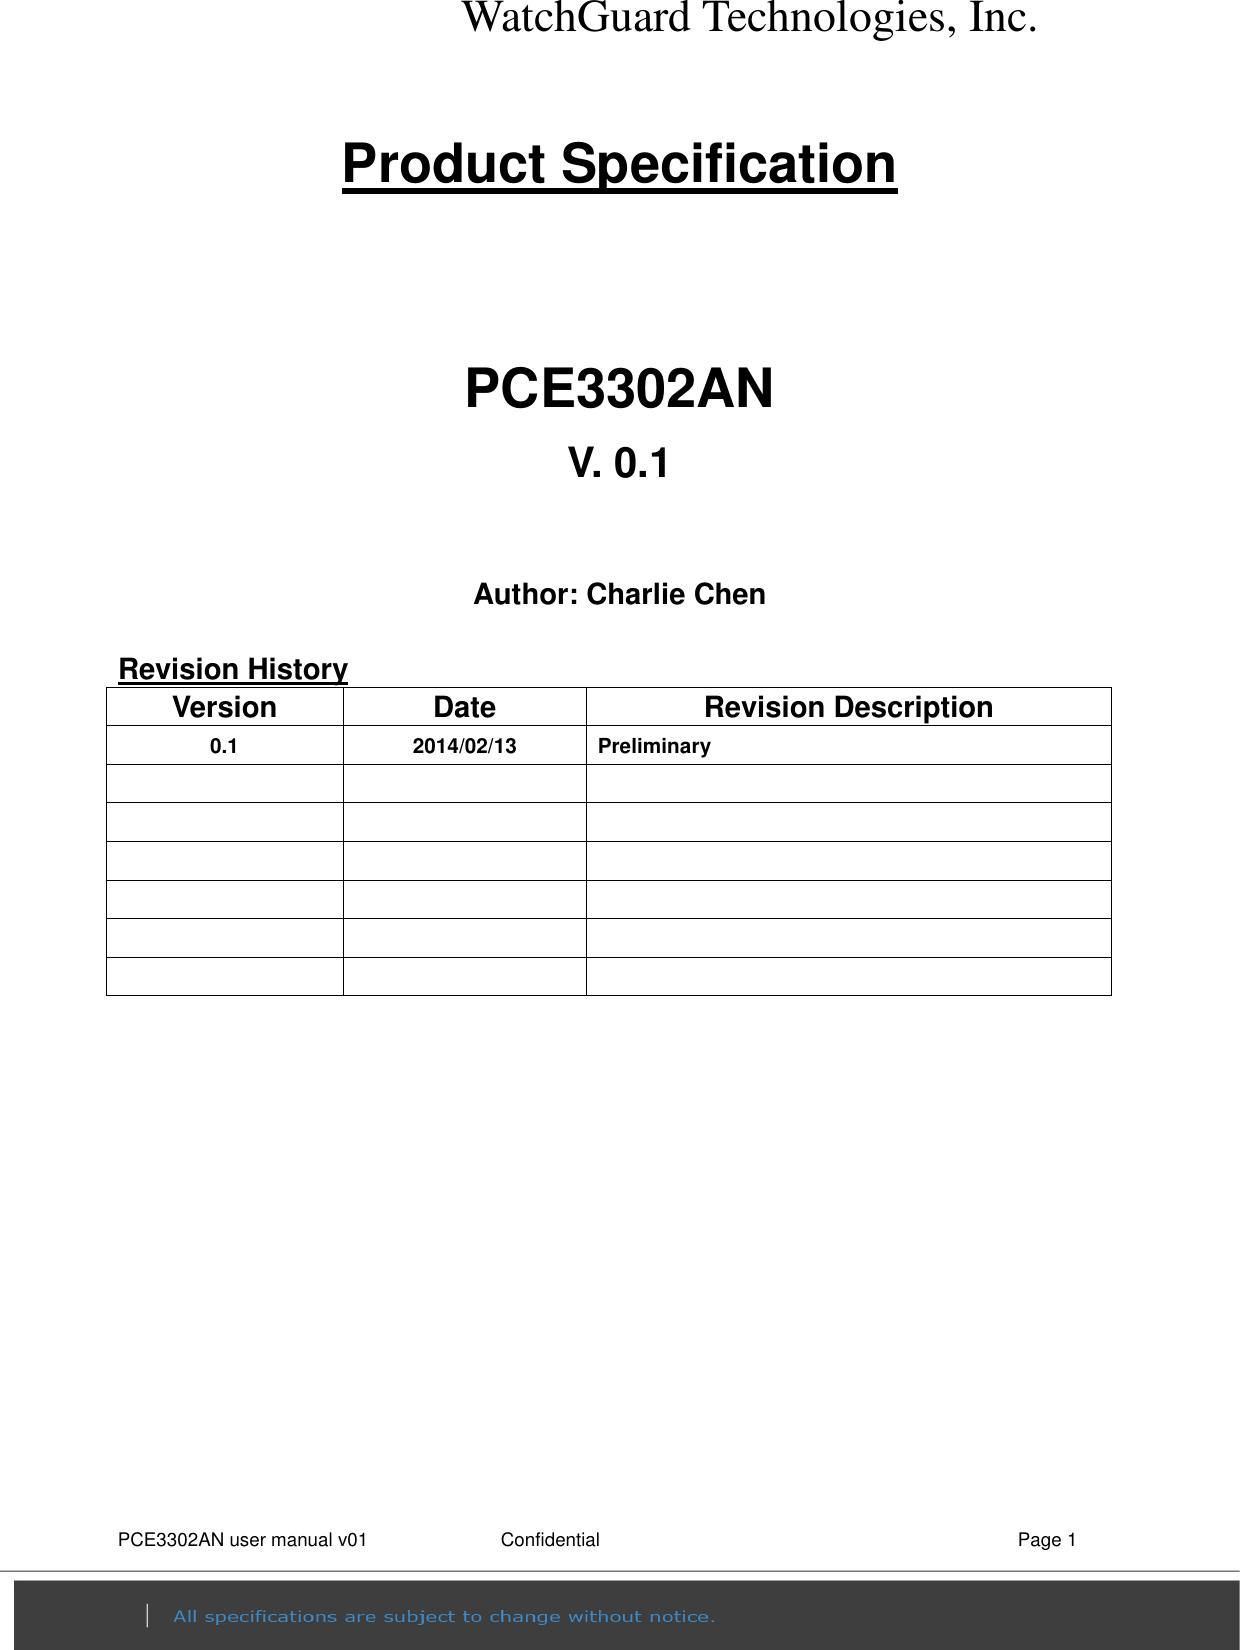 WatchGuard Technologies, Inc. PCE3302AN user manual v01                Confidential    Page 1   Product Specification   PCE3302AN V. 0.1  Author: Charlie Chen  Revision History Version  Date  Revision Description 0.1  2014/02/13  Preliminary                                